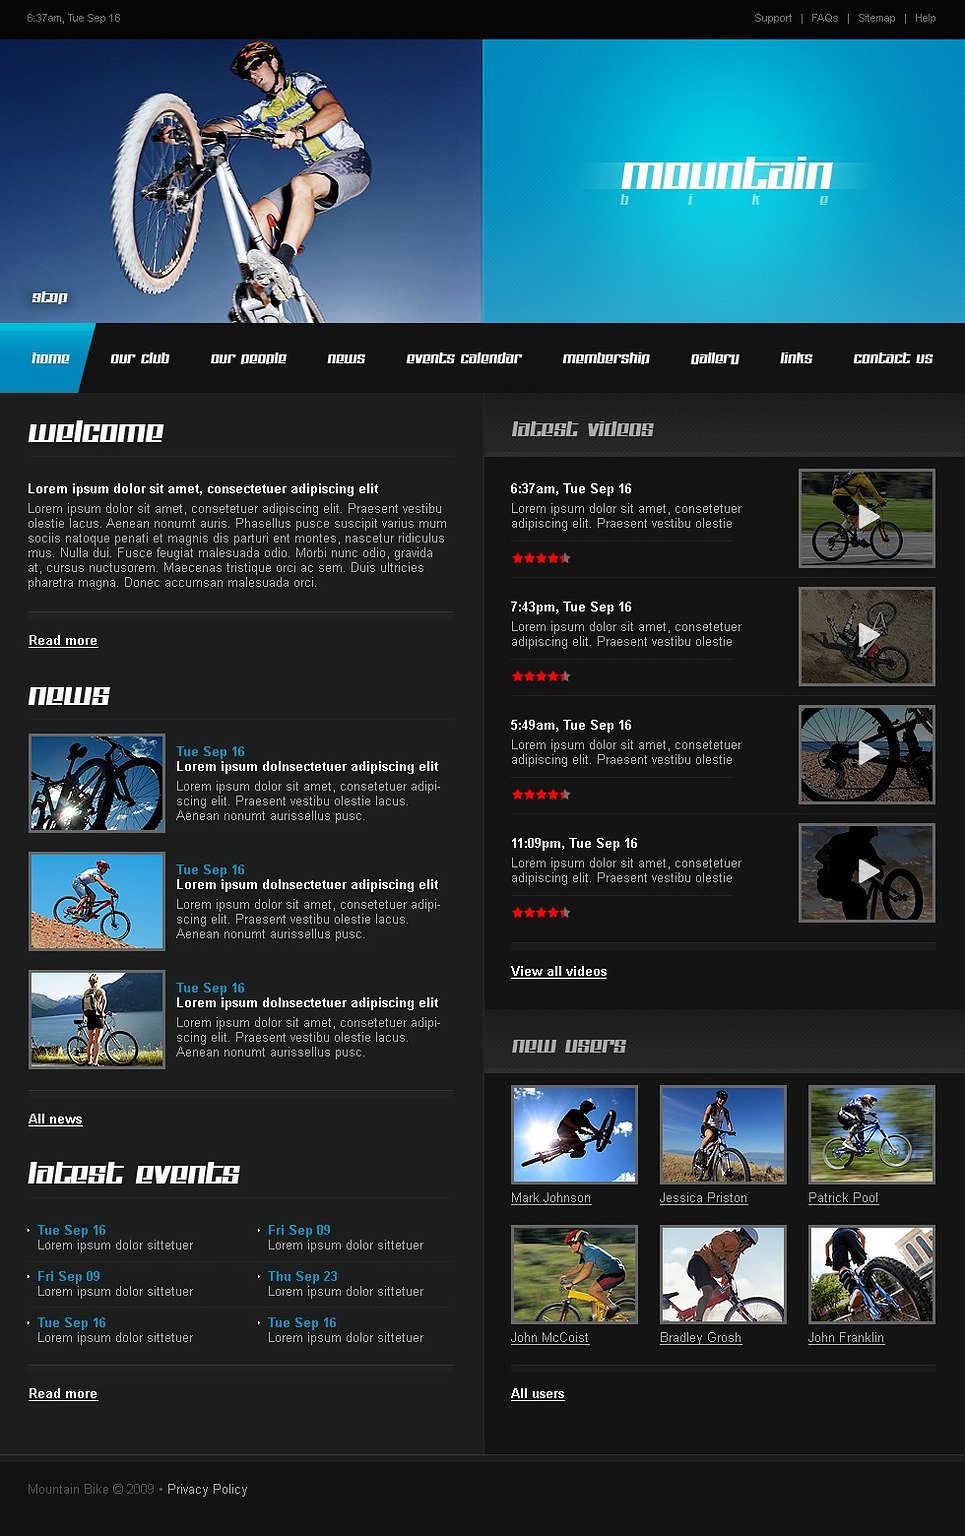 Cycling Website Templates